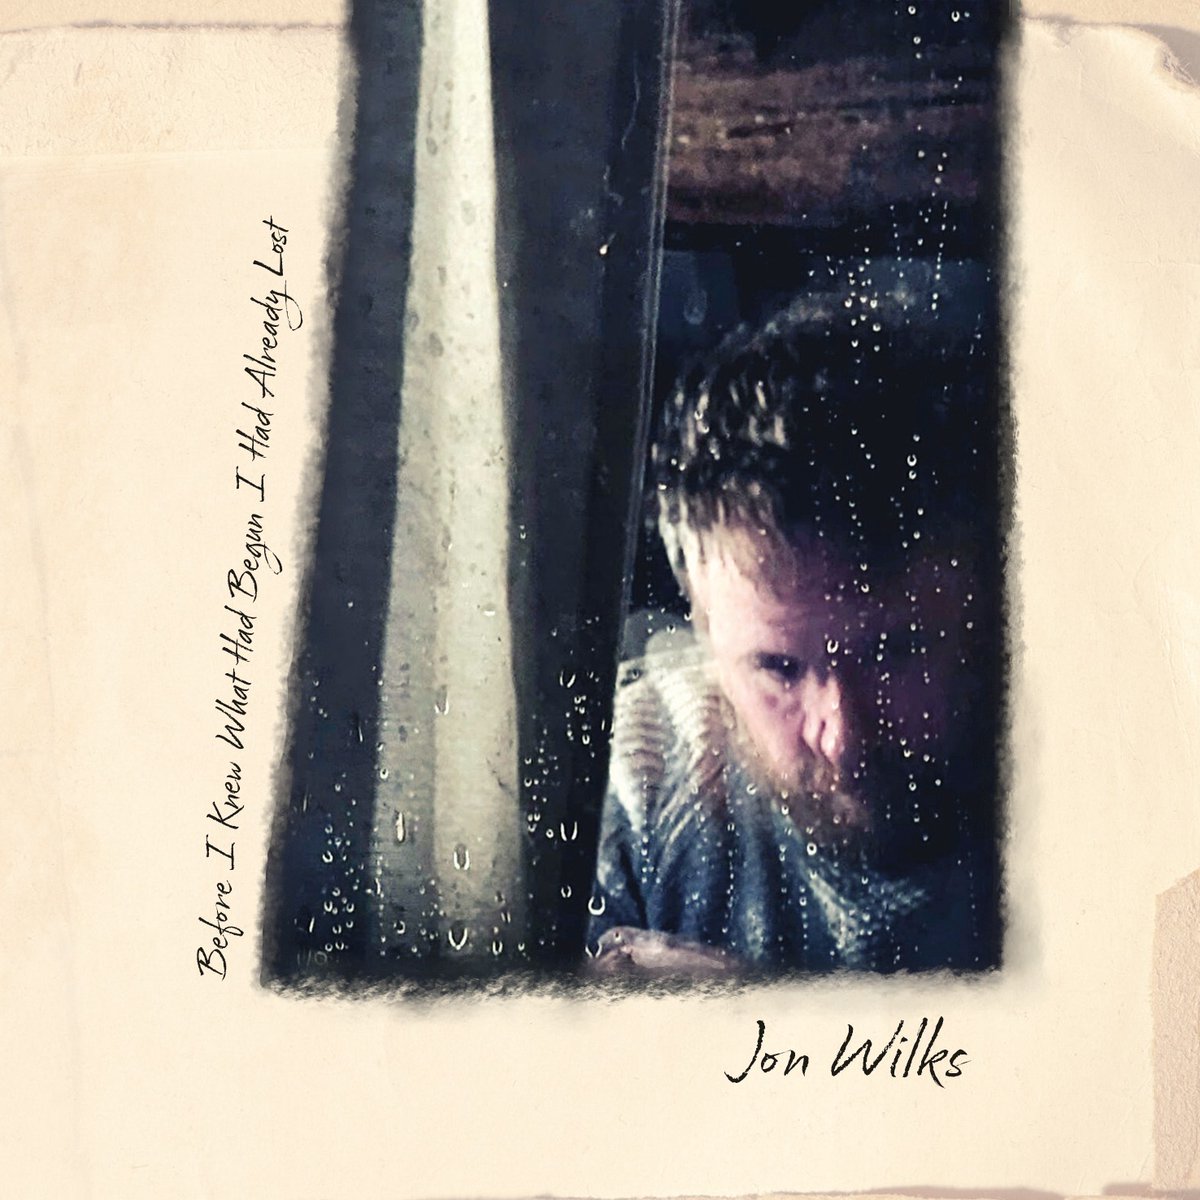 We finish with the mighty @JonWilksMusic & his sublime 4th studio album. Familiar Roud features here but Wilks is a talented songwriter & ‘Greek Street’ is superb. The whole album has that rare magic in taking the listener on new journeys upon every listen. Here’s to 2024!